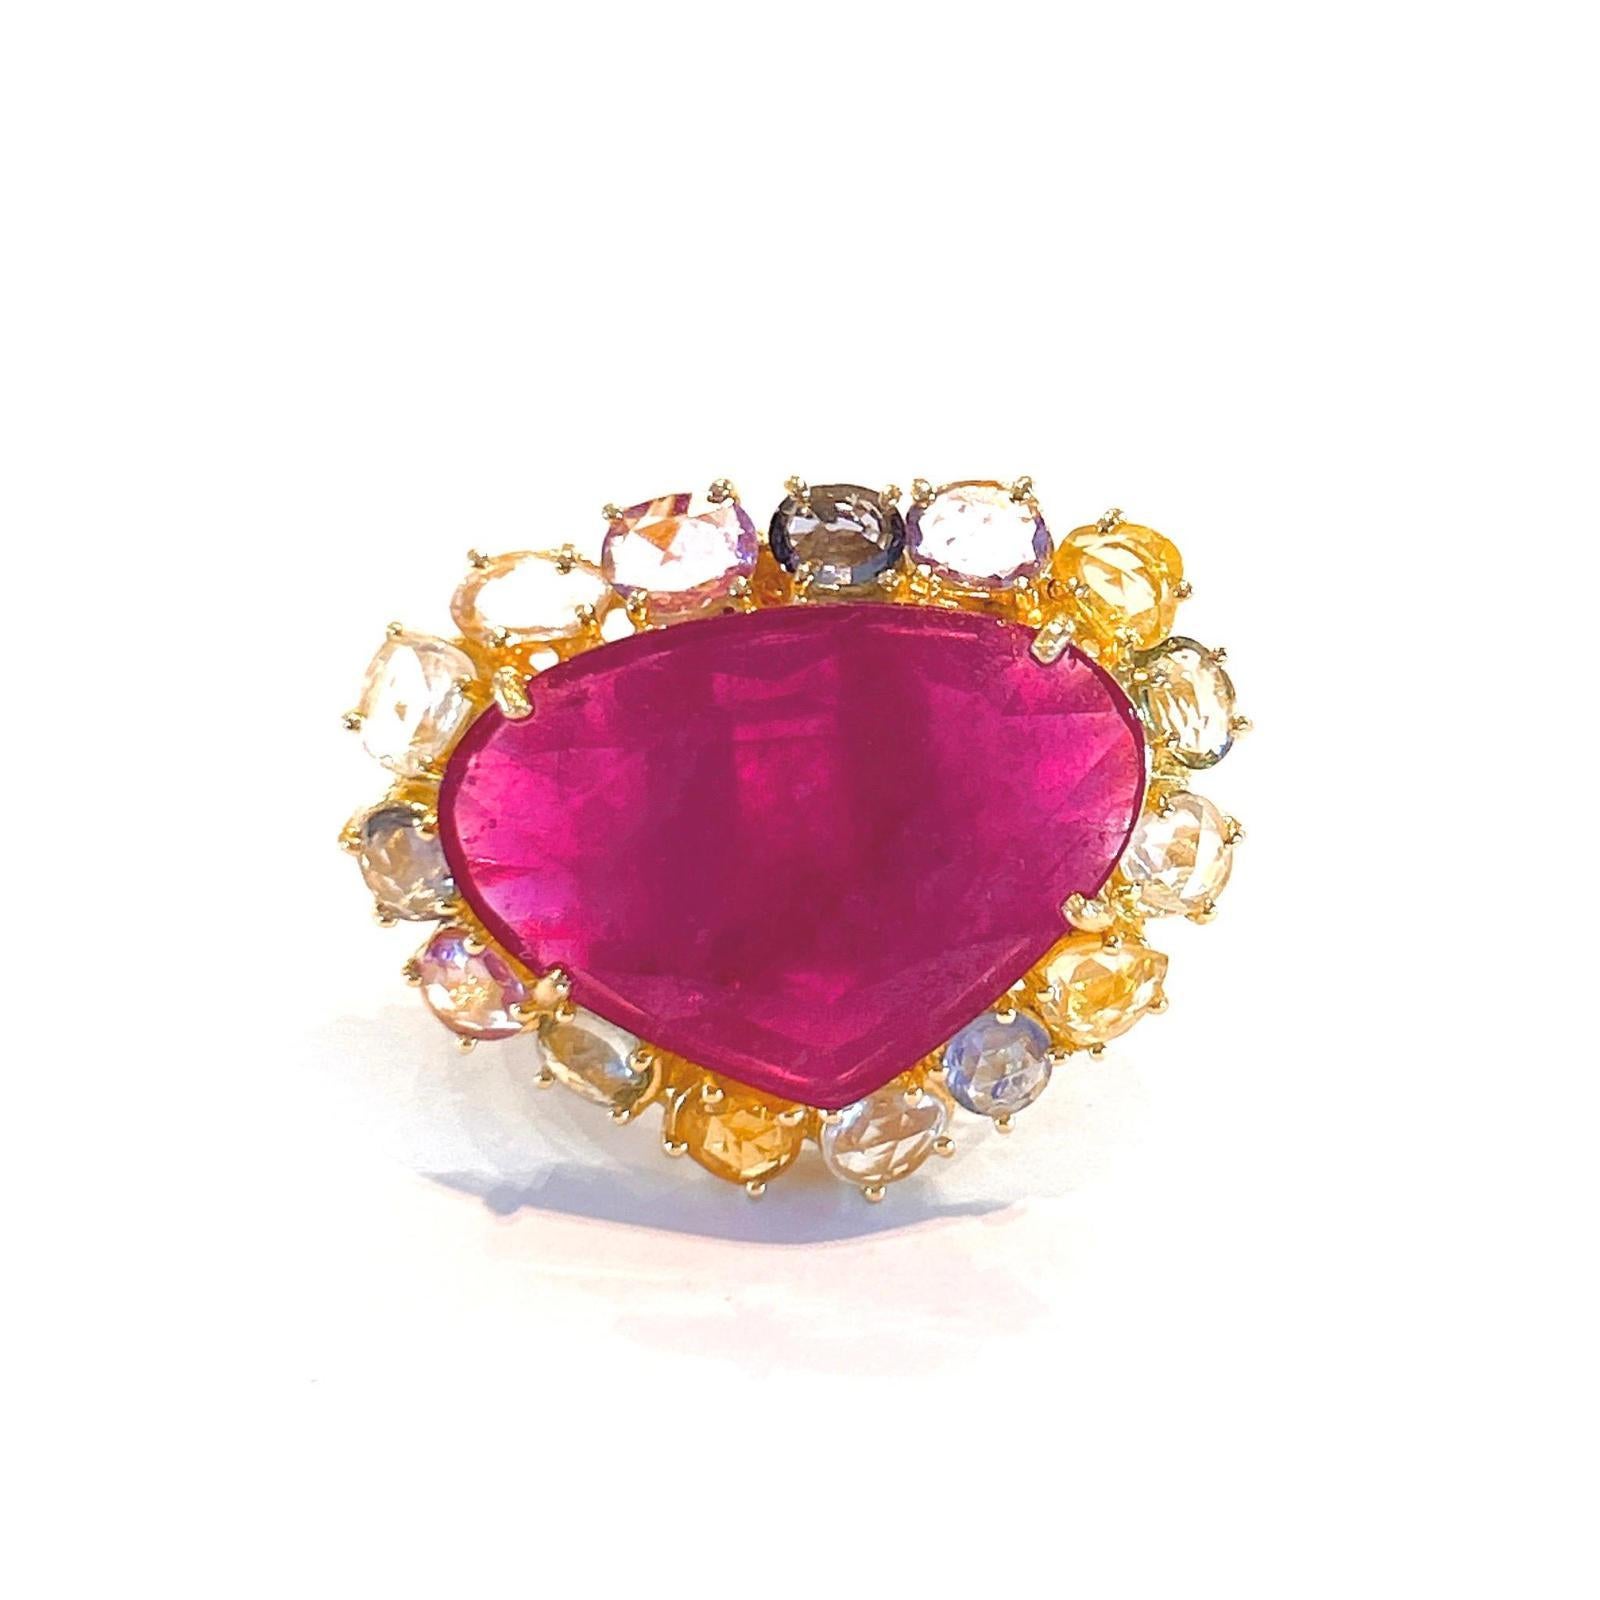 Bochic “Orient” Red Ruby & Multi Color Sapphire Ring Set In 18K Gold & Silver 
Natural Red Cabochon Ruby 
18 Carats 
Natural Multi Color Fancy Rose Cut Sapphires from Sri Lanka. Beautiful pastel colors like Lilac, Rose, Light Blue, Olive, Gold and